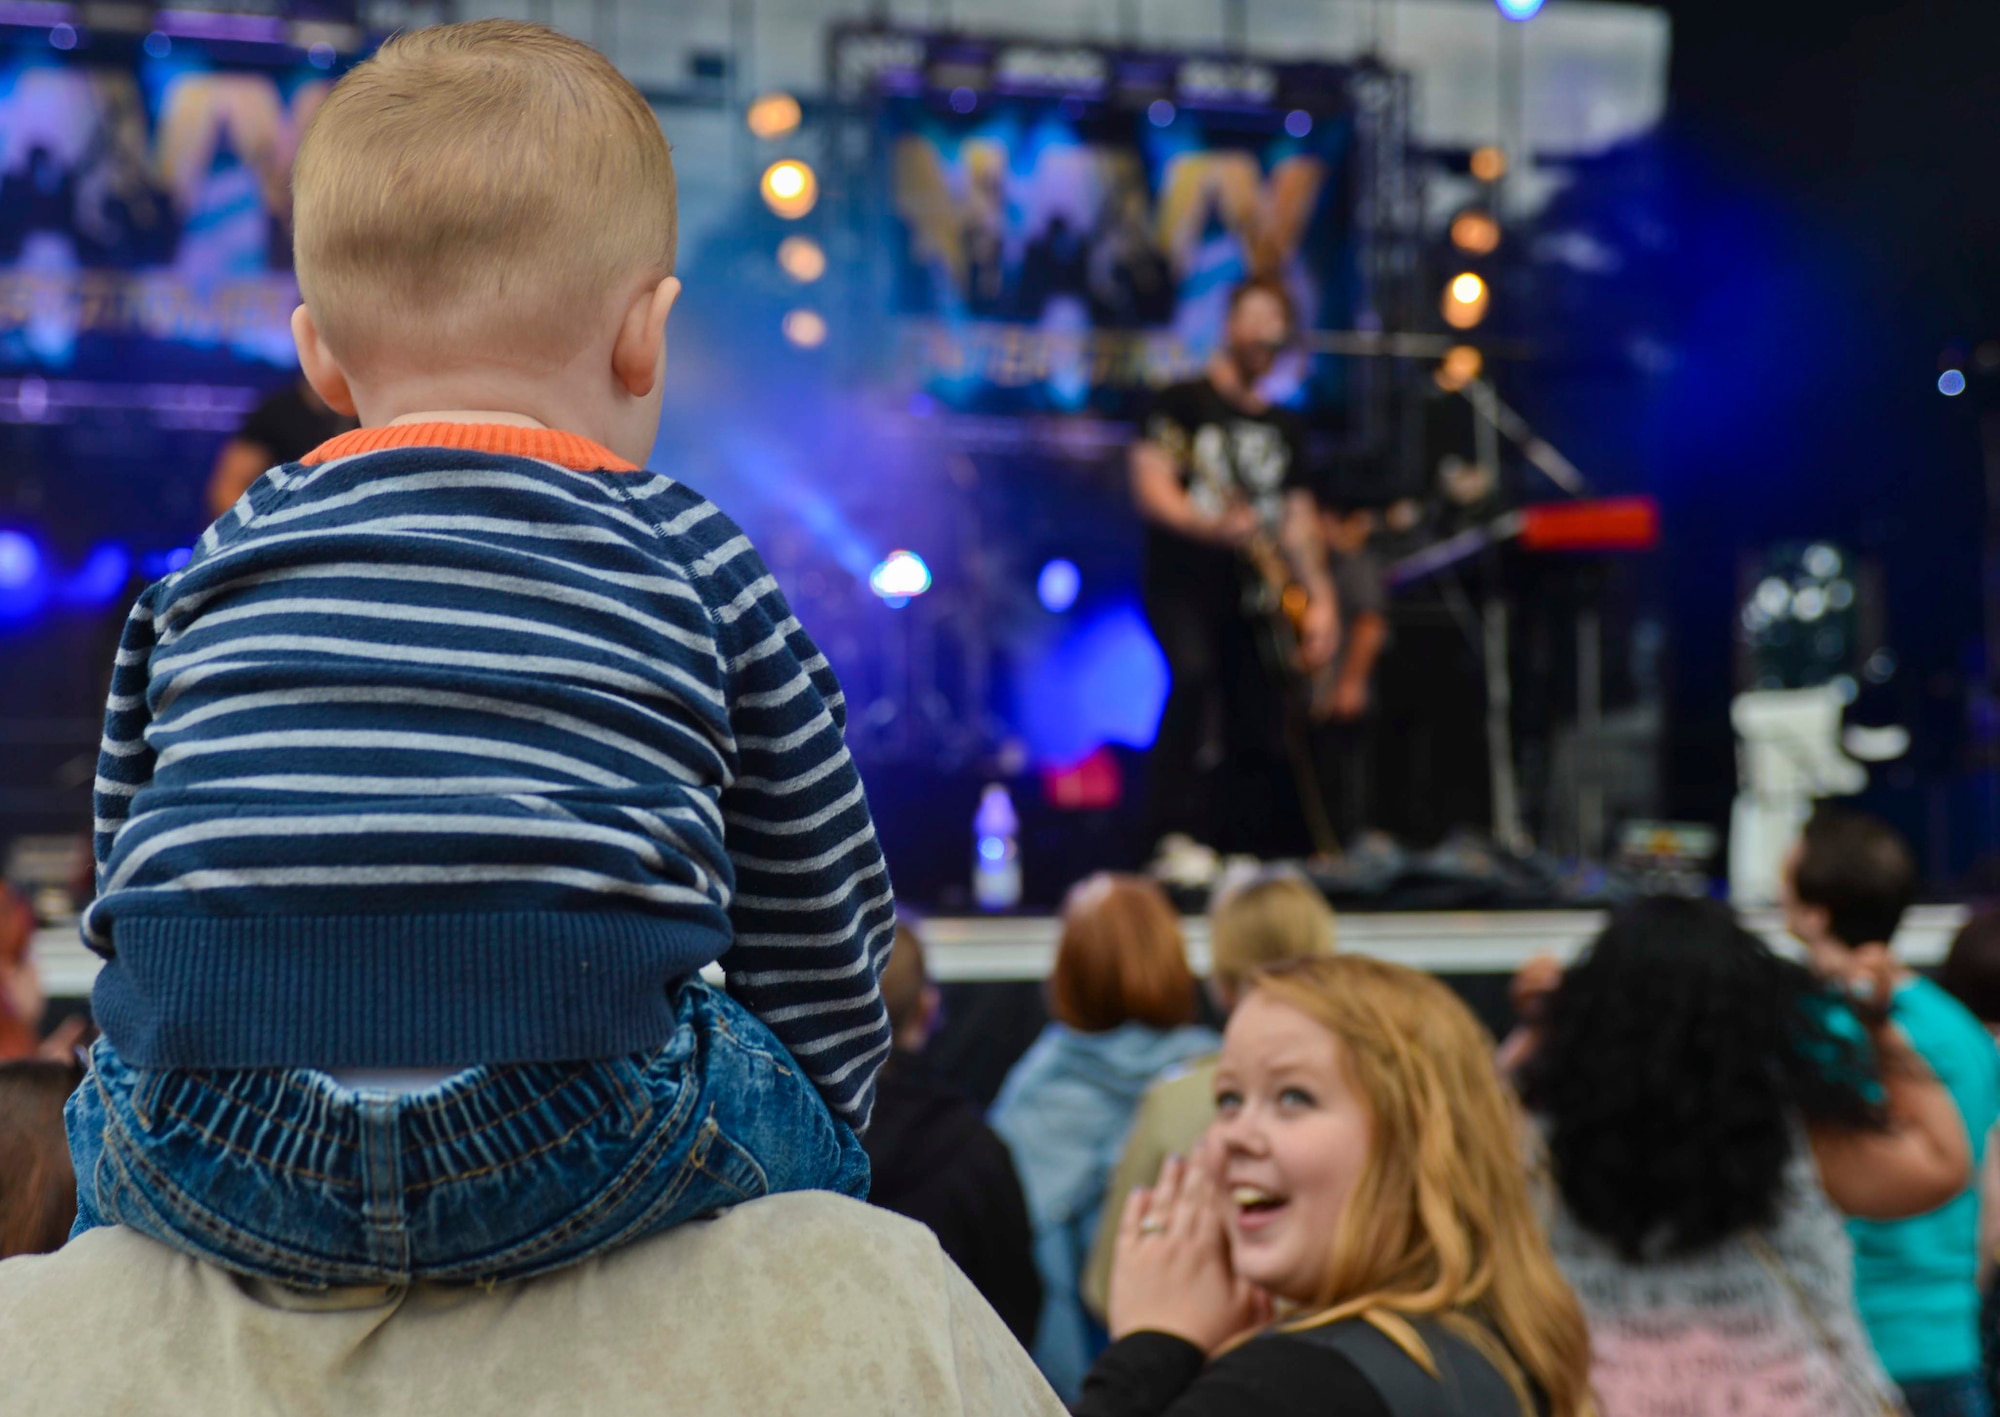 A child watches as David Cook, American Idol-winning musician, performs on the stage during the Belgian-American Friendship Day at Kleine Brogel Air Base, Belgium, June 27, 2014. Cook performed the free concert as part of his worldwide tour sponsored by Navy Entertainment and Armed Forces Entertainment. (U.S. Air Force photo by Staff Sgt. Joe W. McFadden/Released)